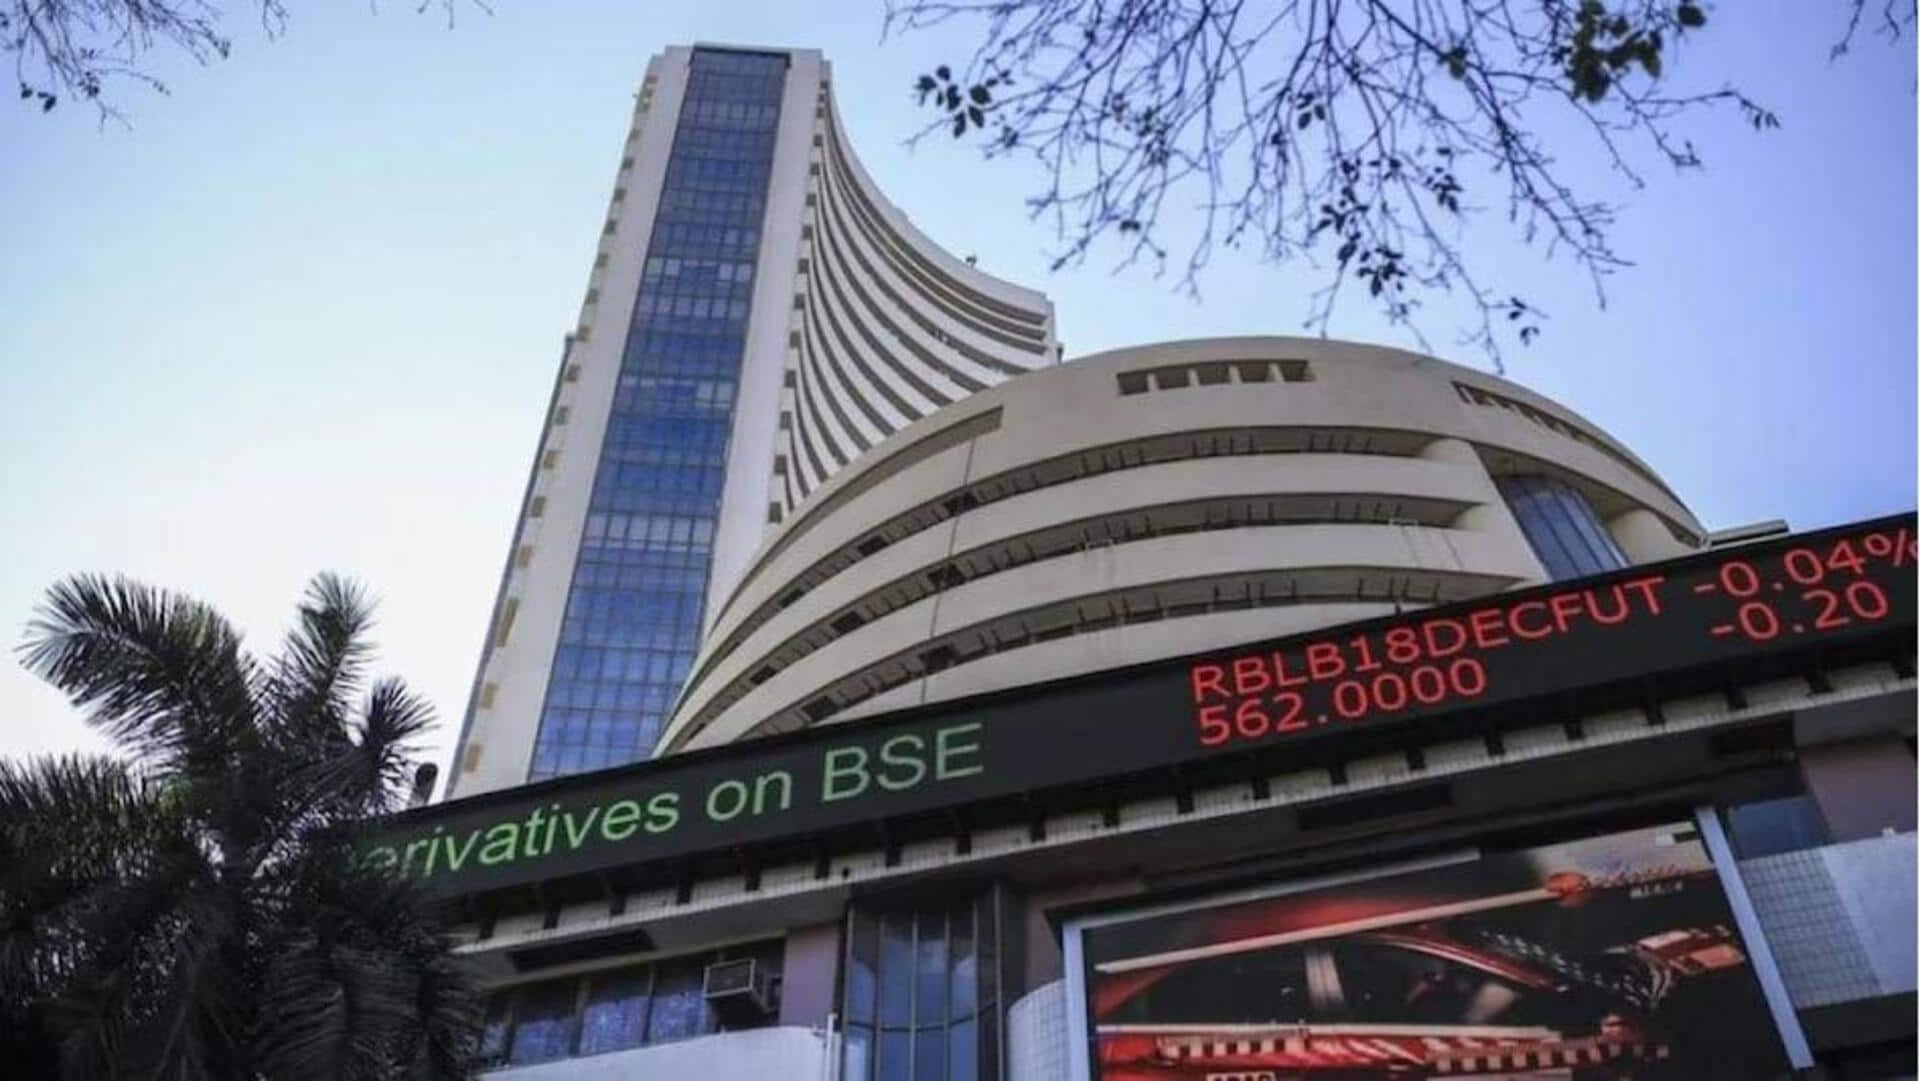 BSE-listed firms hit record high m-cap of Rs. 331L crore